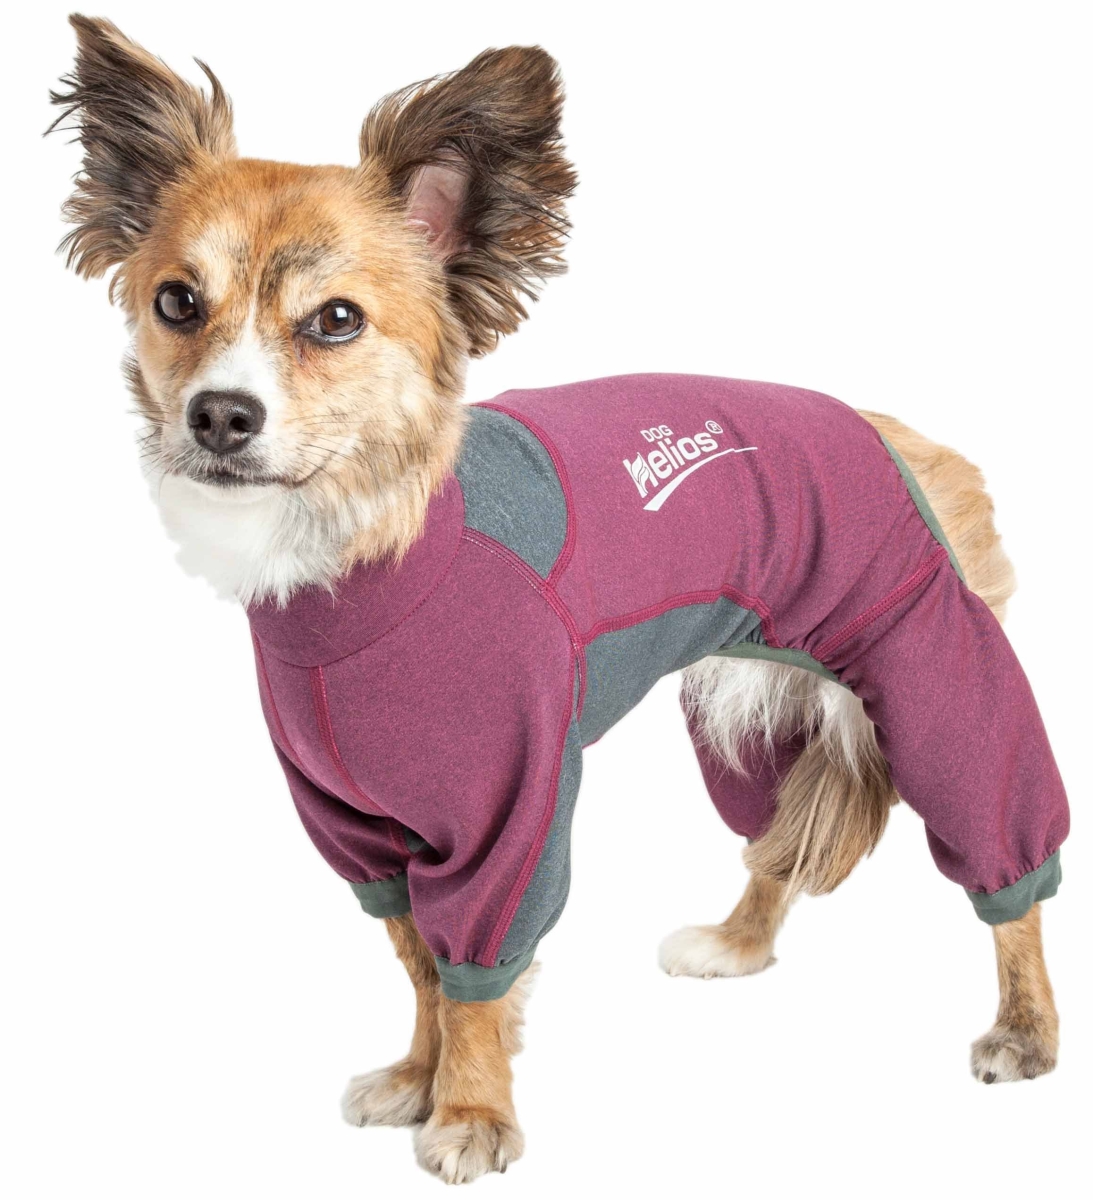 Yghl8pklg Rufflex 4-way-stretch Breathable Full Bodied Performance Dog Warmup Track Suit - Pink & Grey, Large